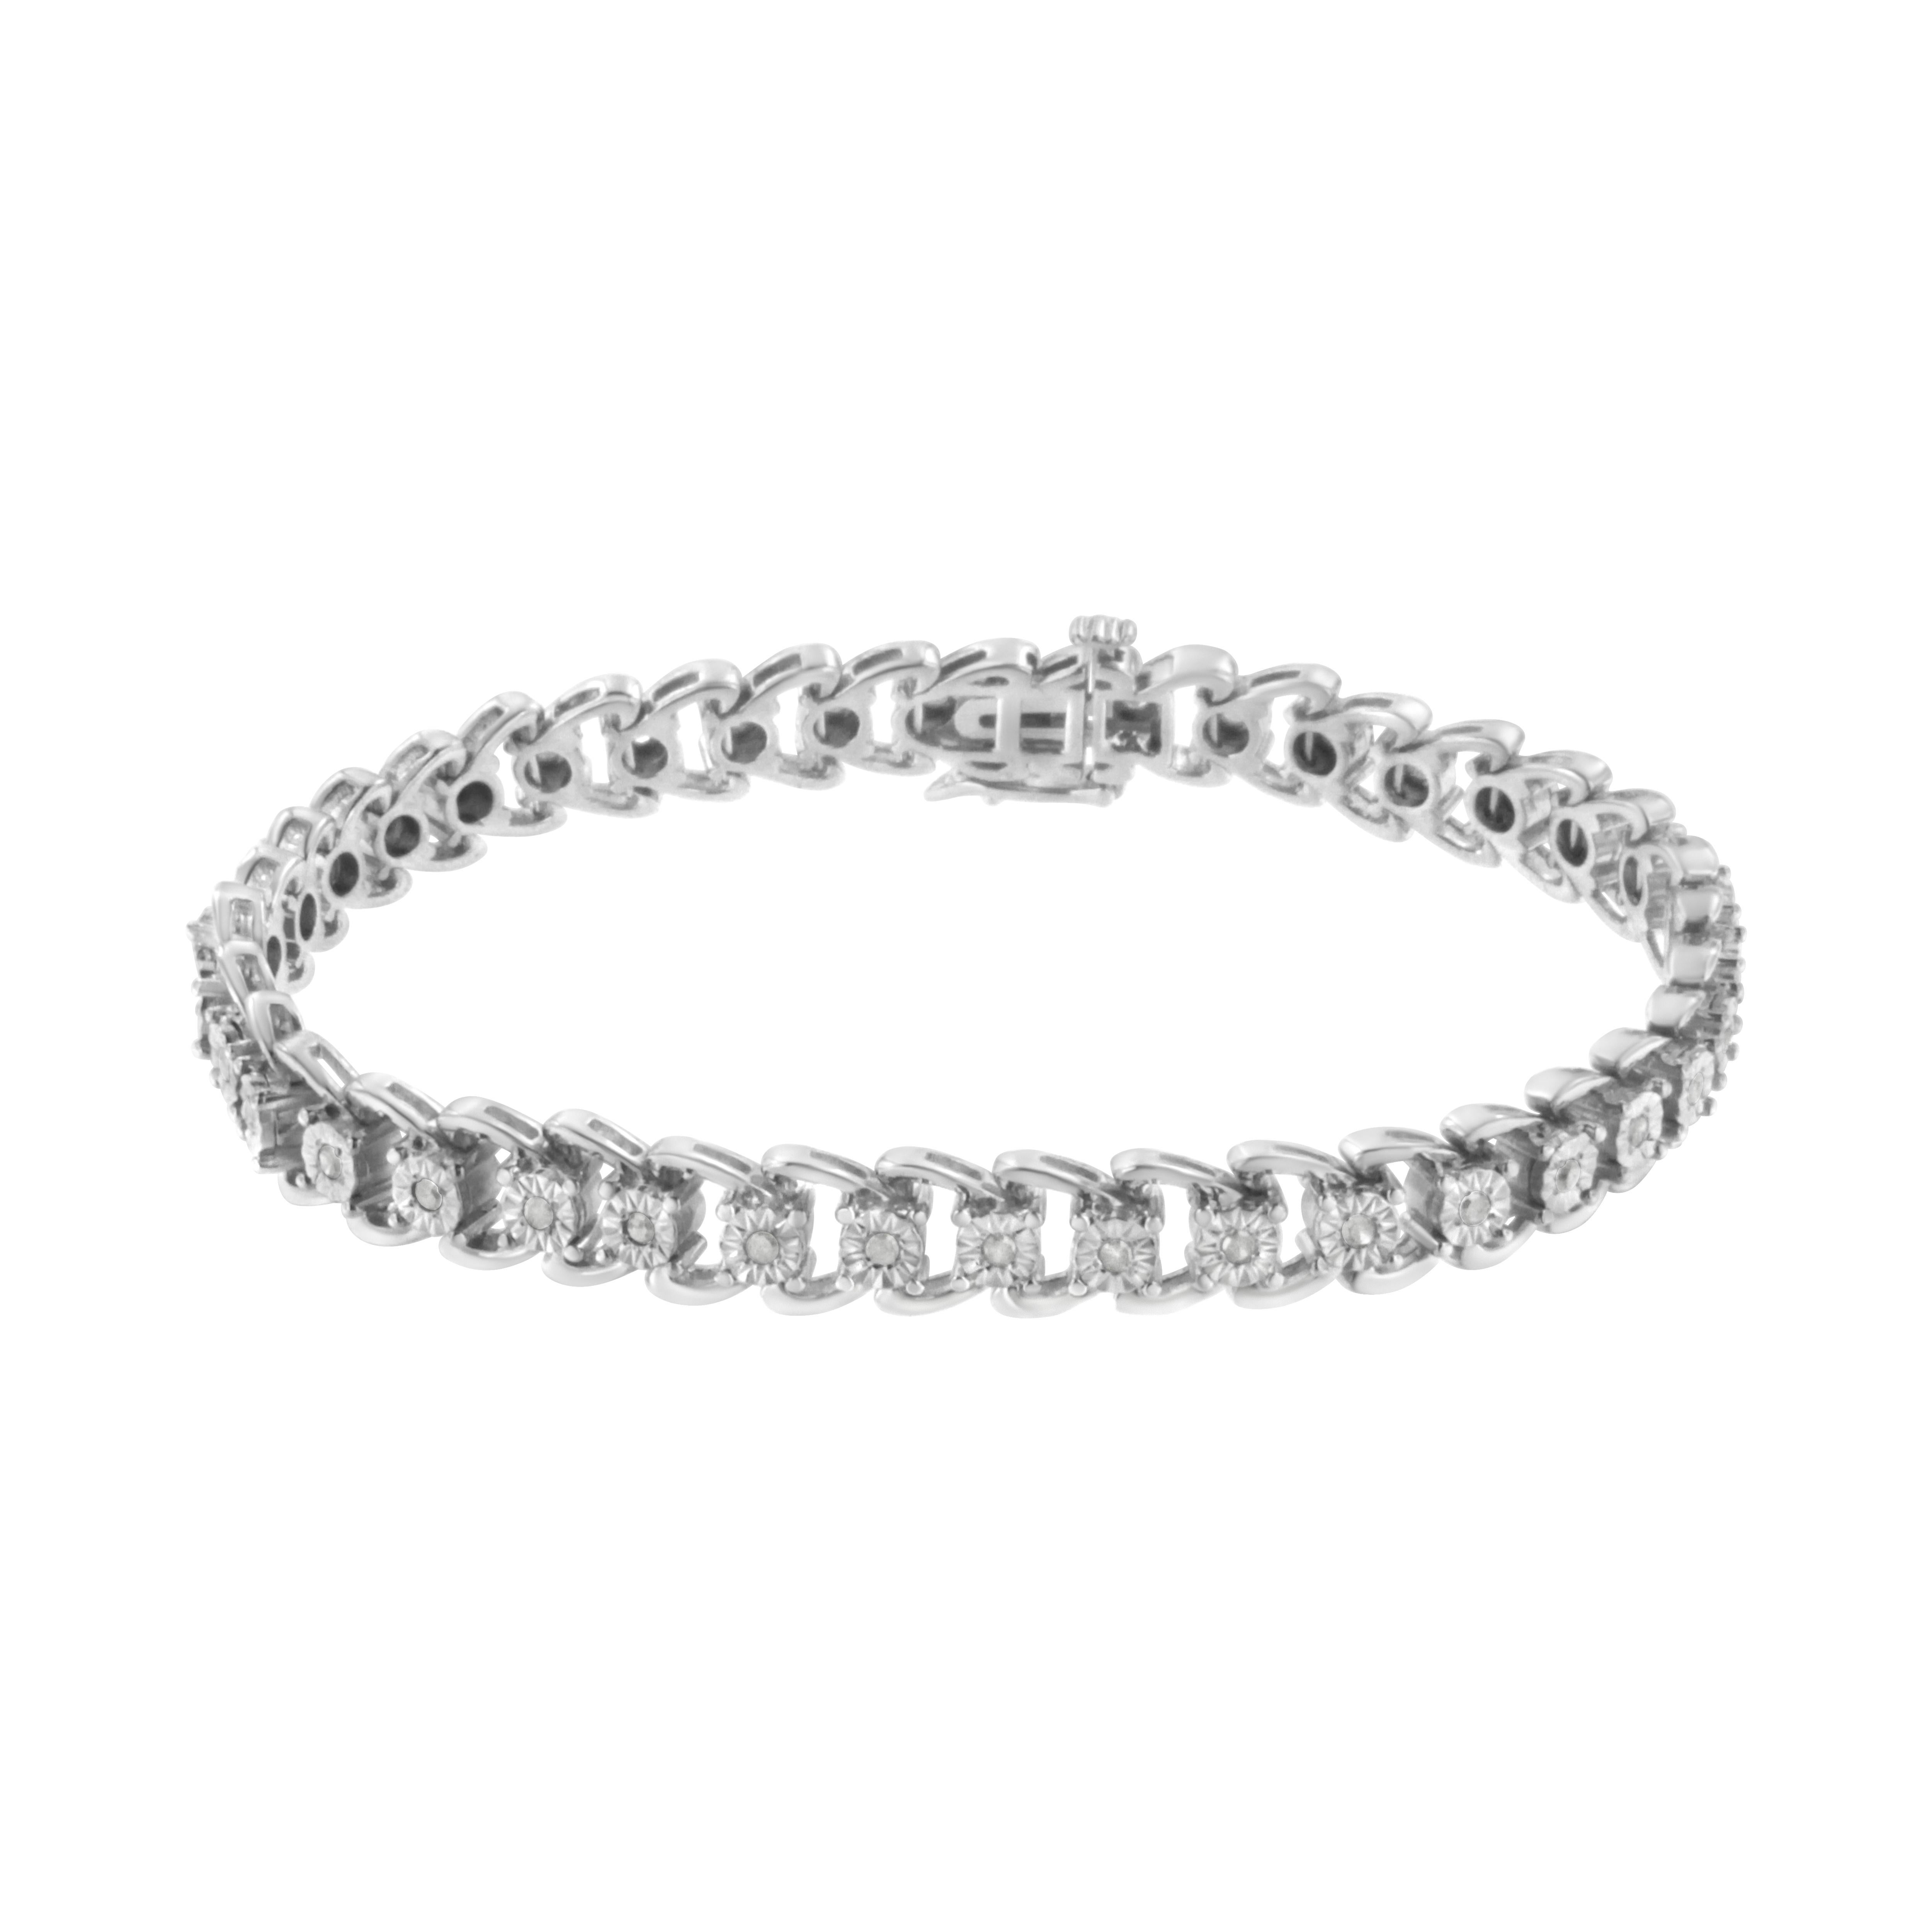 What makes this genuine .925 sterling silver bracelet so unique is the way each intricately detailed link flows into the next one for a dramatic wave effect. And the 38 eye-catching diamonds held inside add even more charm and character. 
A